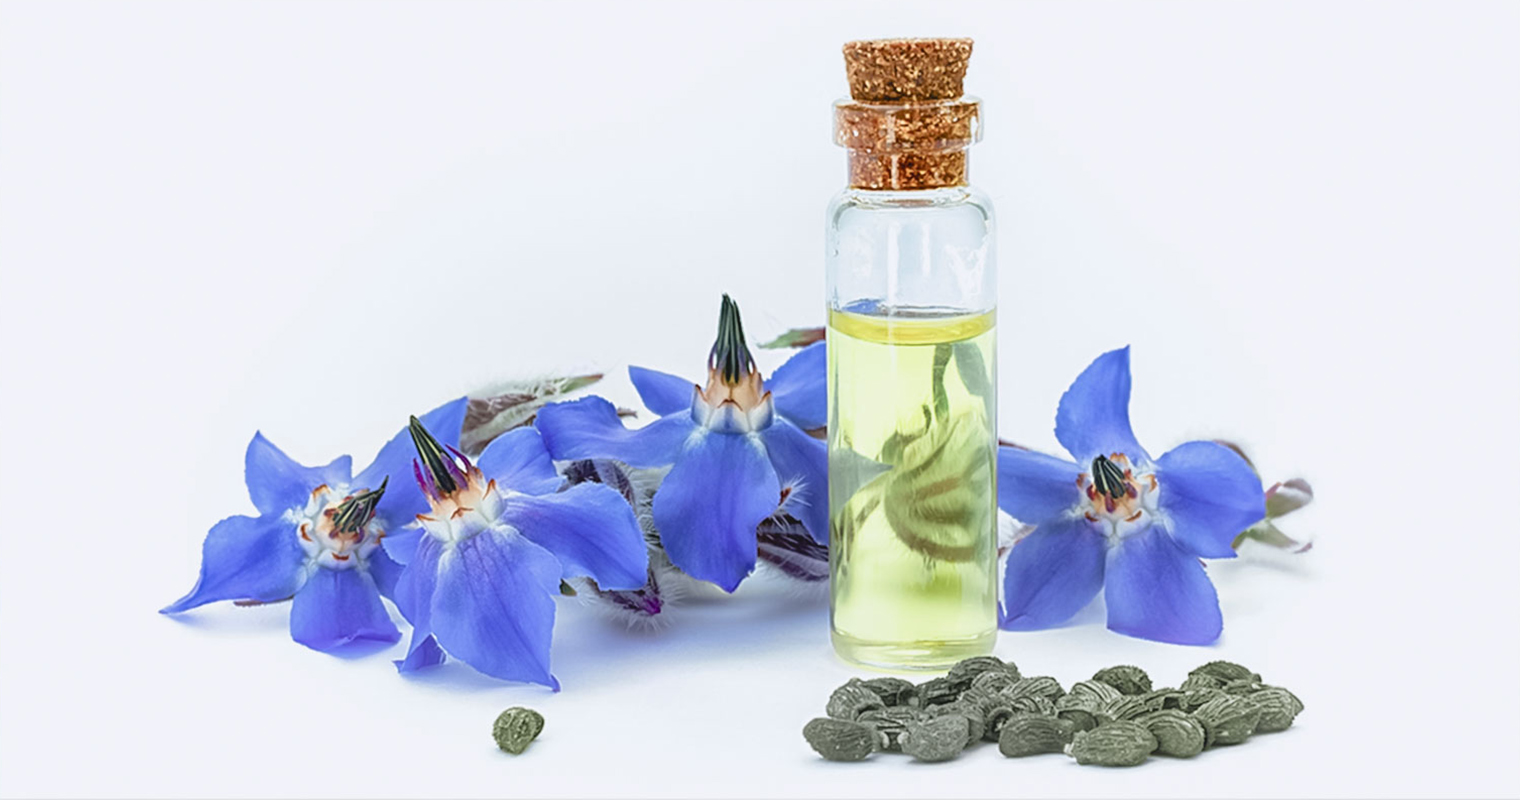 A bottle of Borage oil in front of Borage flower and Borage seeds